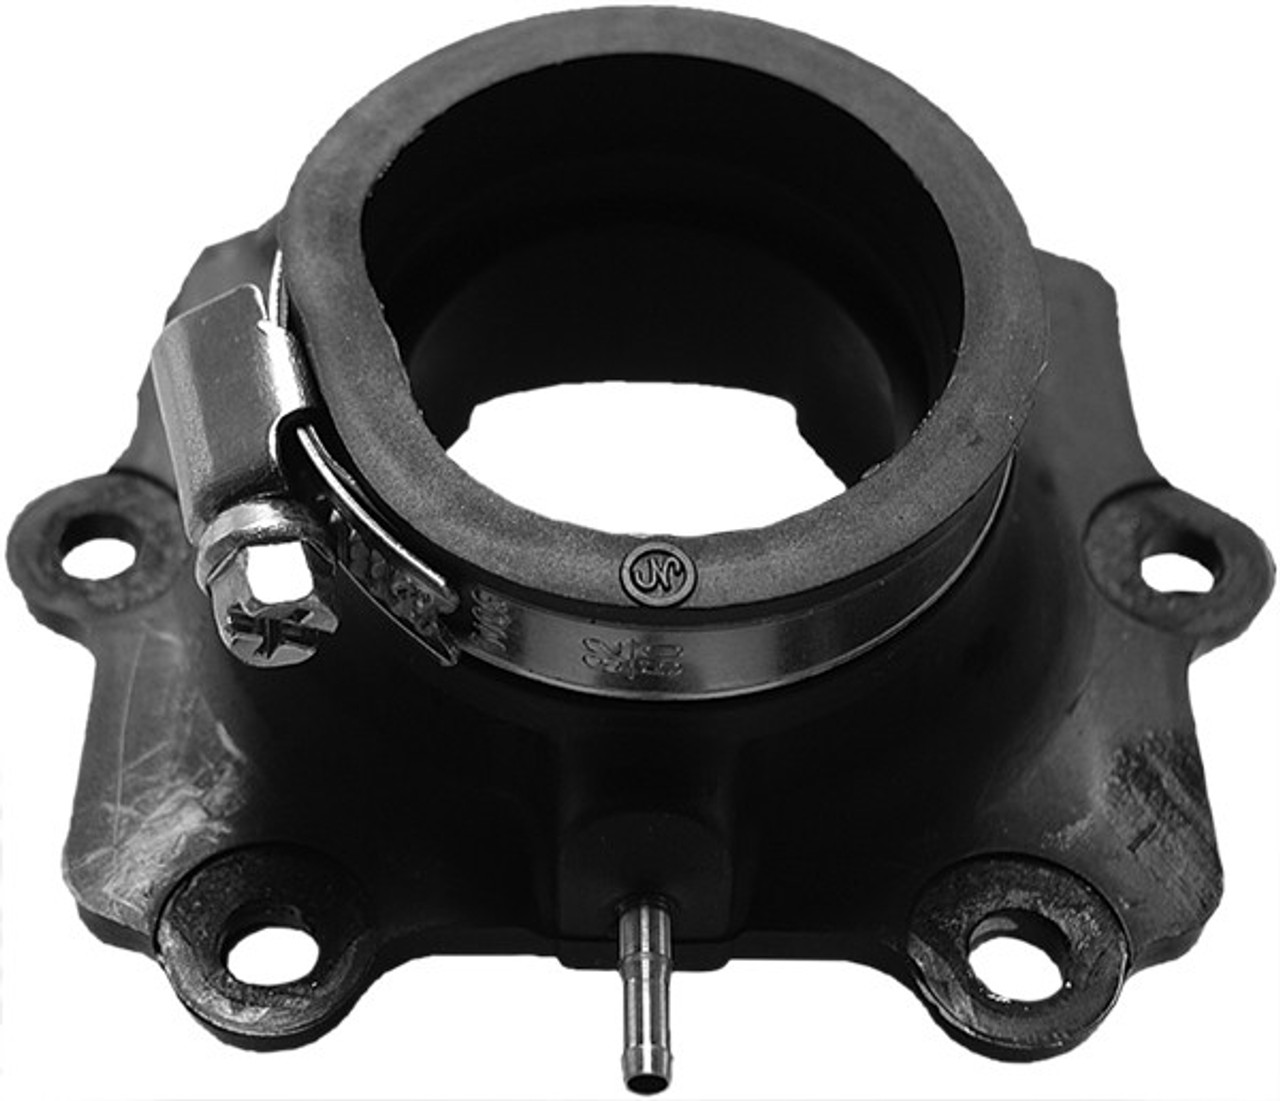 Replacement Intake Mounting Flange compatible with Arctic Cat Part# 12-14815 OEM# 3005-034